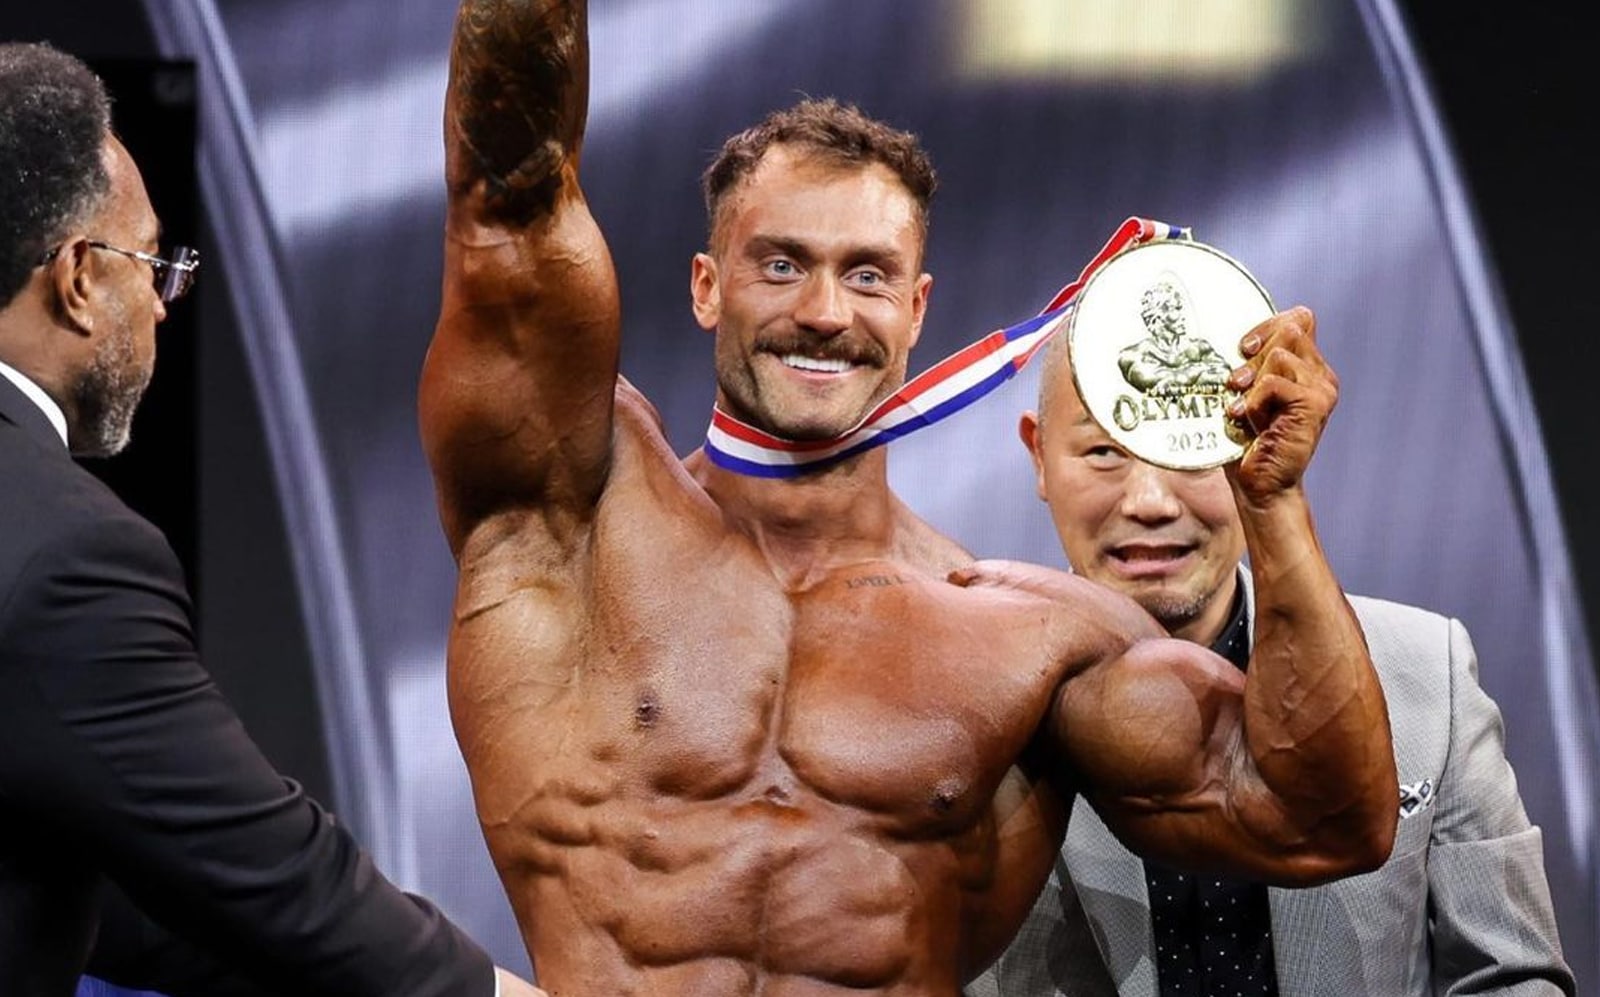 Mr Olympia 2023: competition results by category